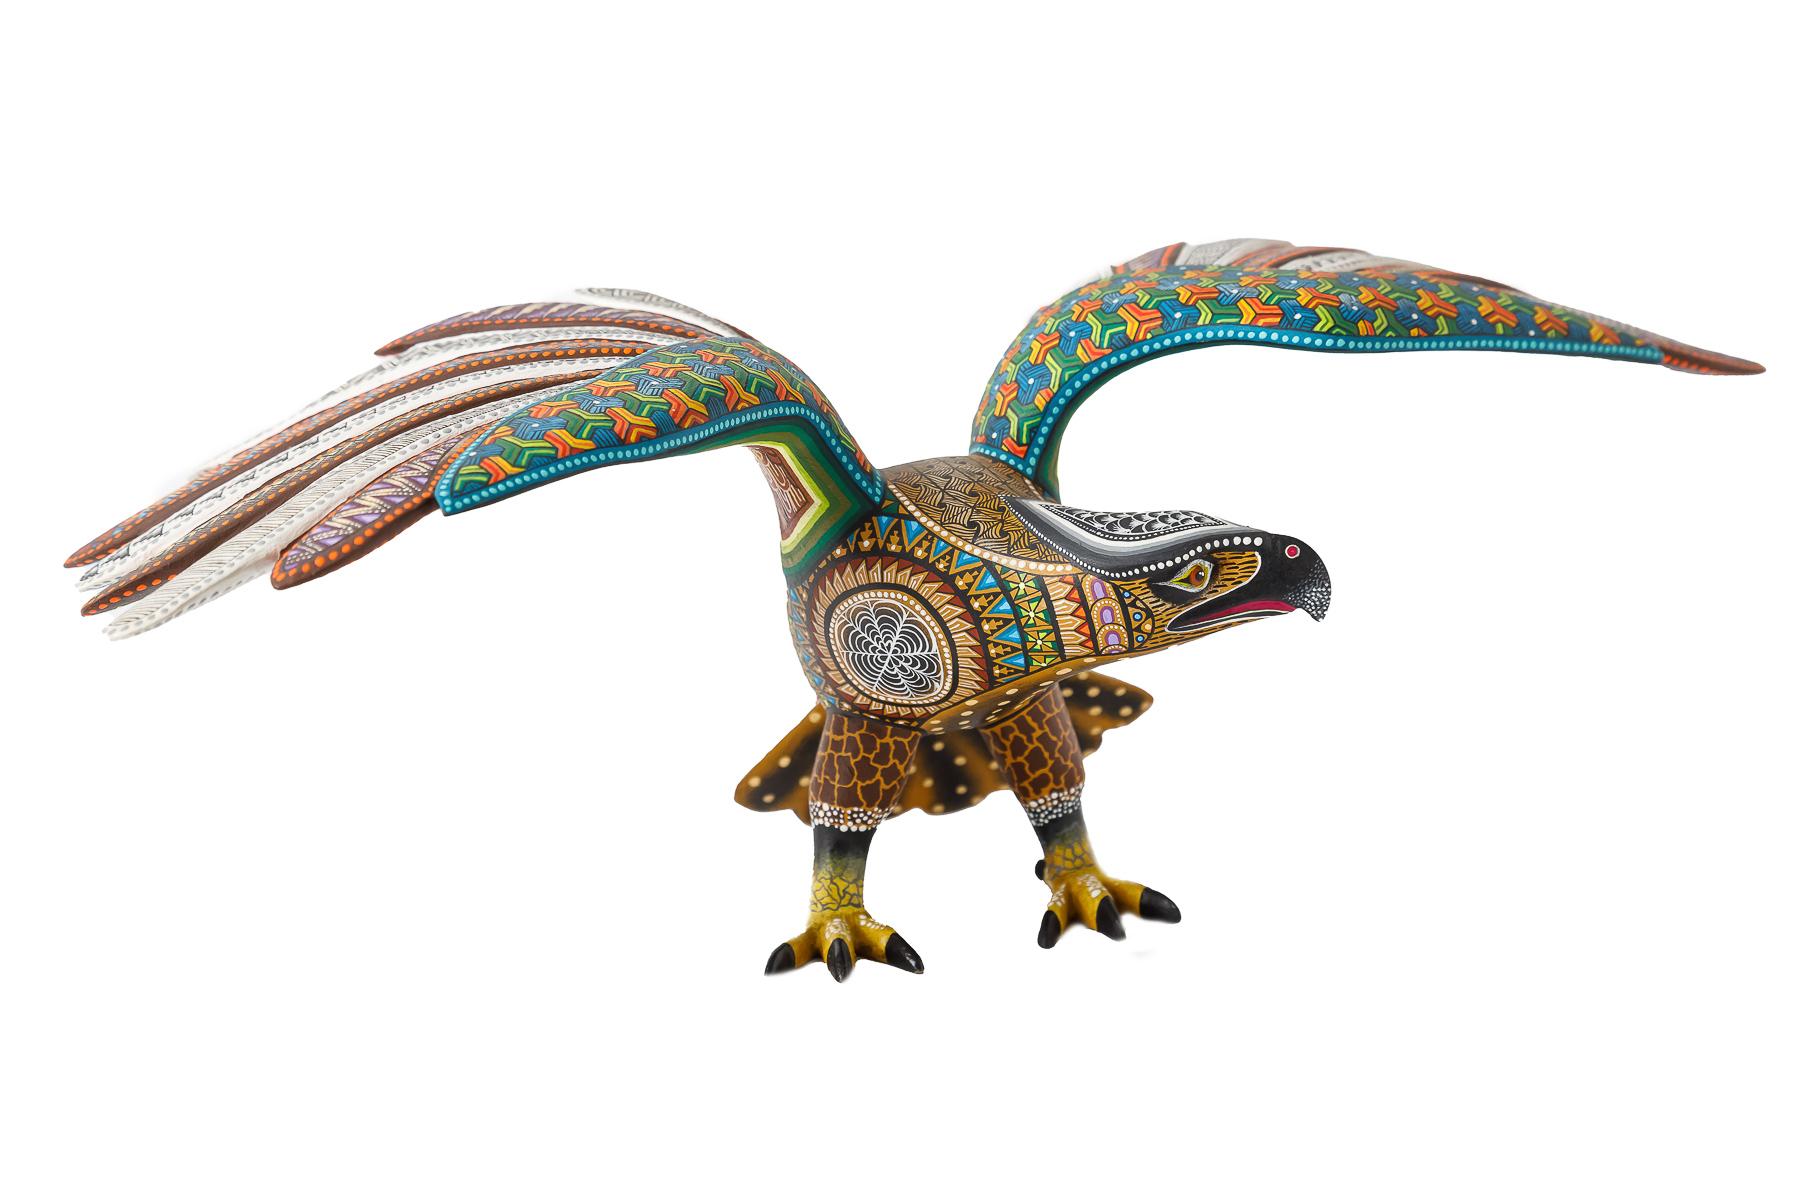 Aguila - Eagle Alebrije
This Mexican Aguila - Eagle Alebrije made with Copal wood, wood carving technique gouges, machete and sandpaper, decorated with acrylic paintings with Zapotec symbols.
At Cactus Fine Art, we offer an exclusive selection of